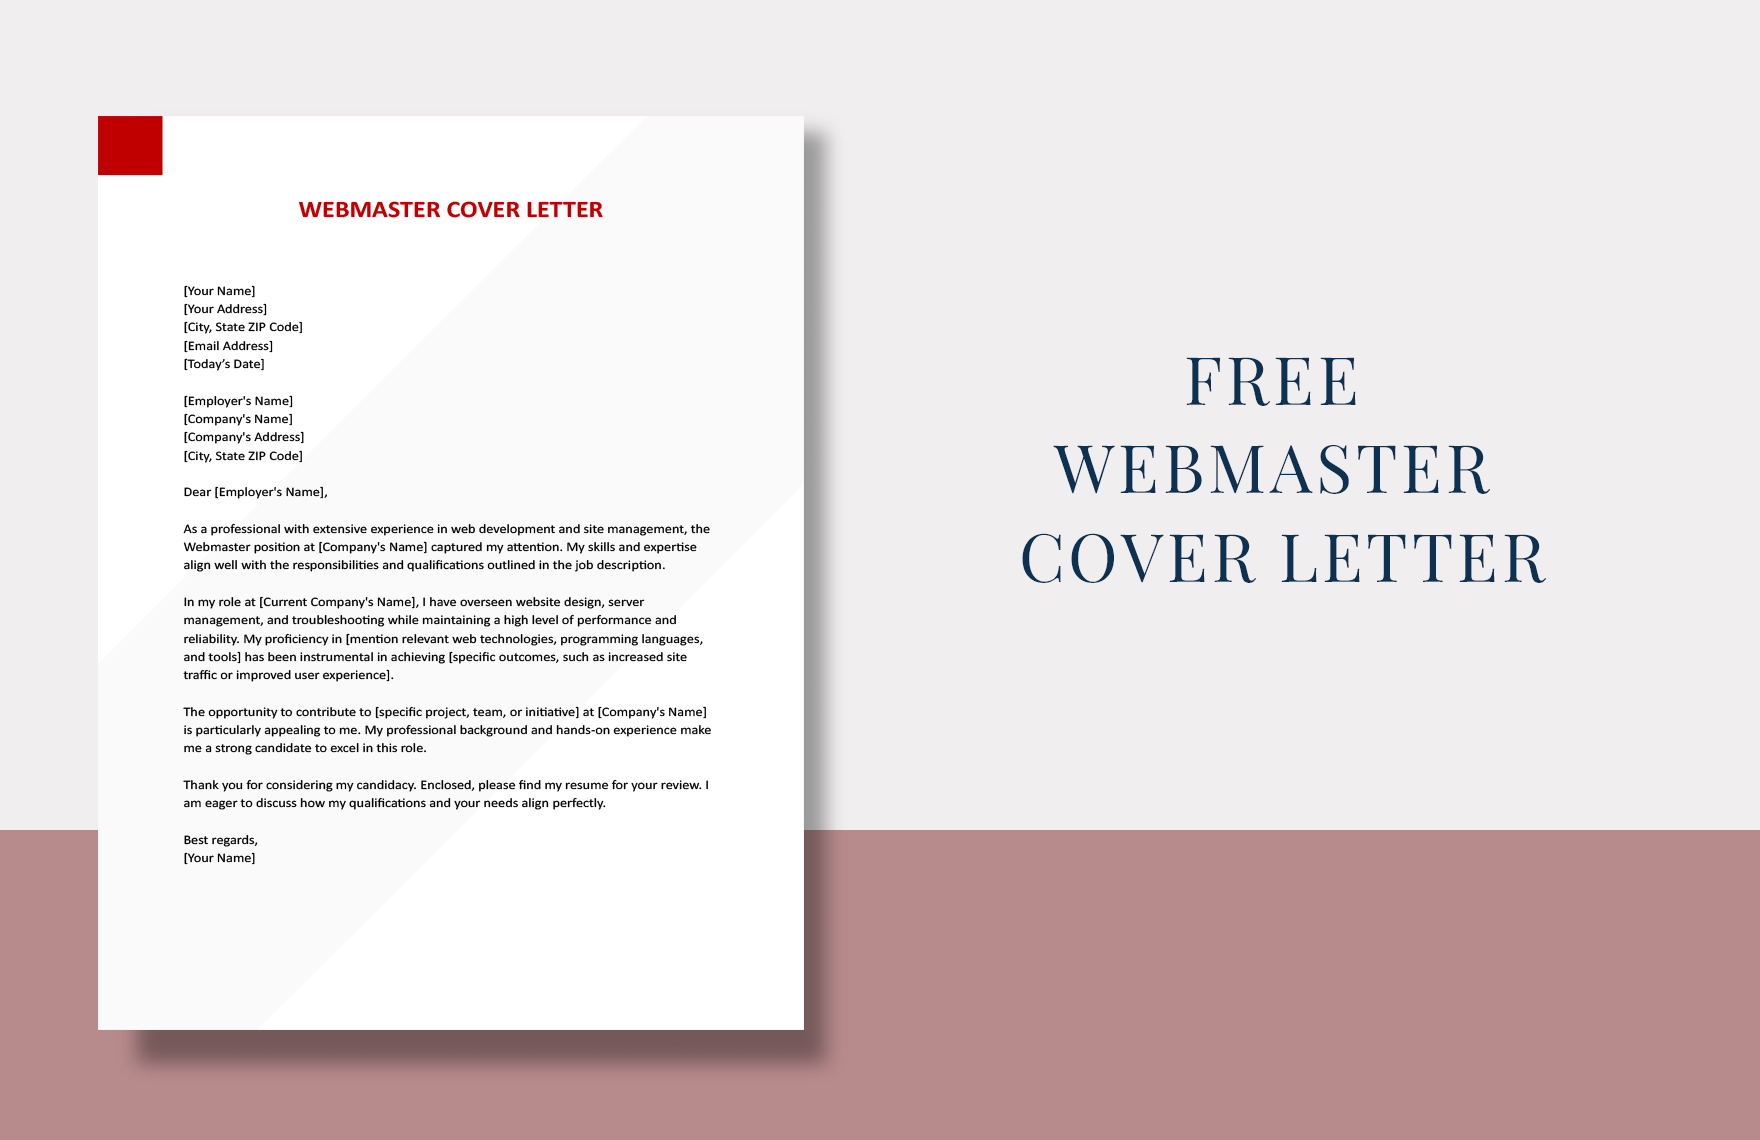 Webmaster Cover Letter in Word, Google Docs